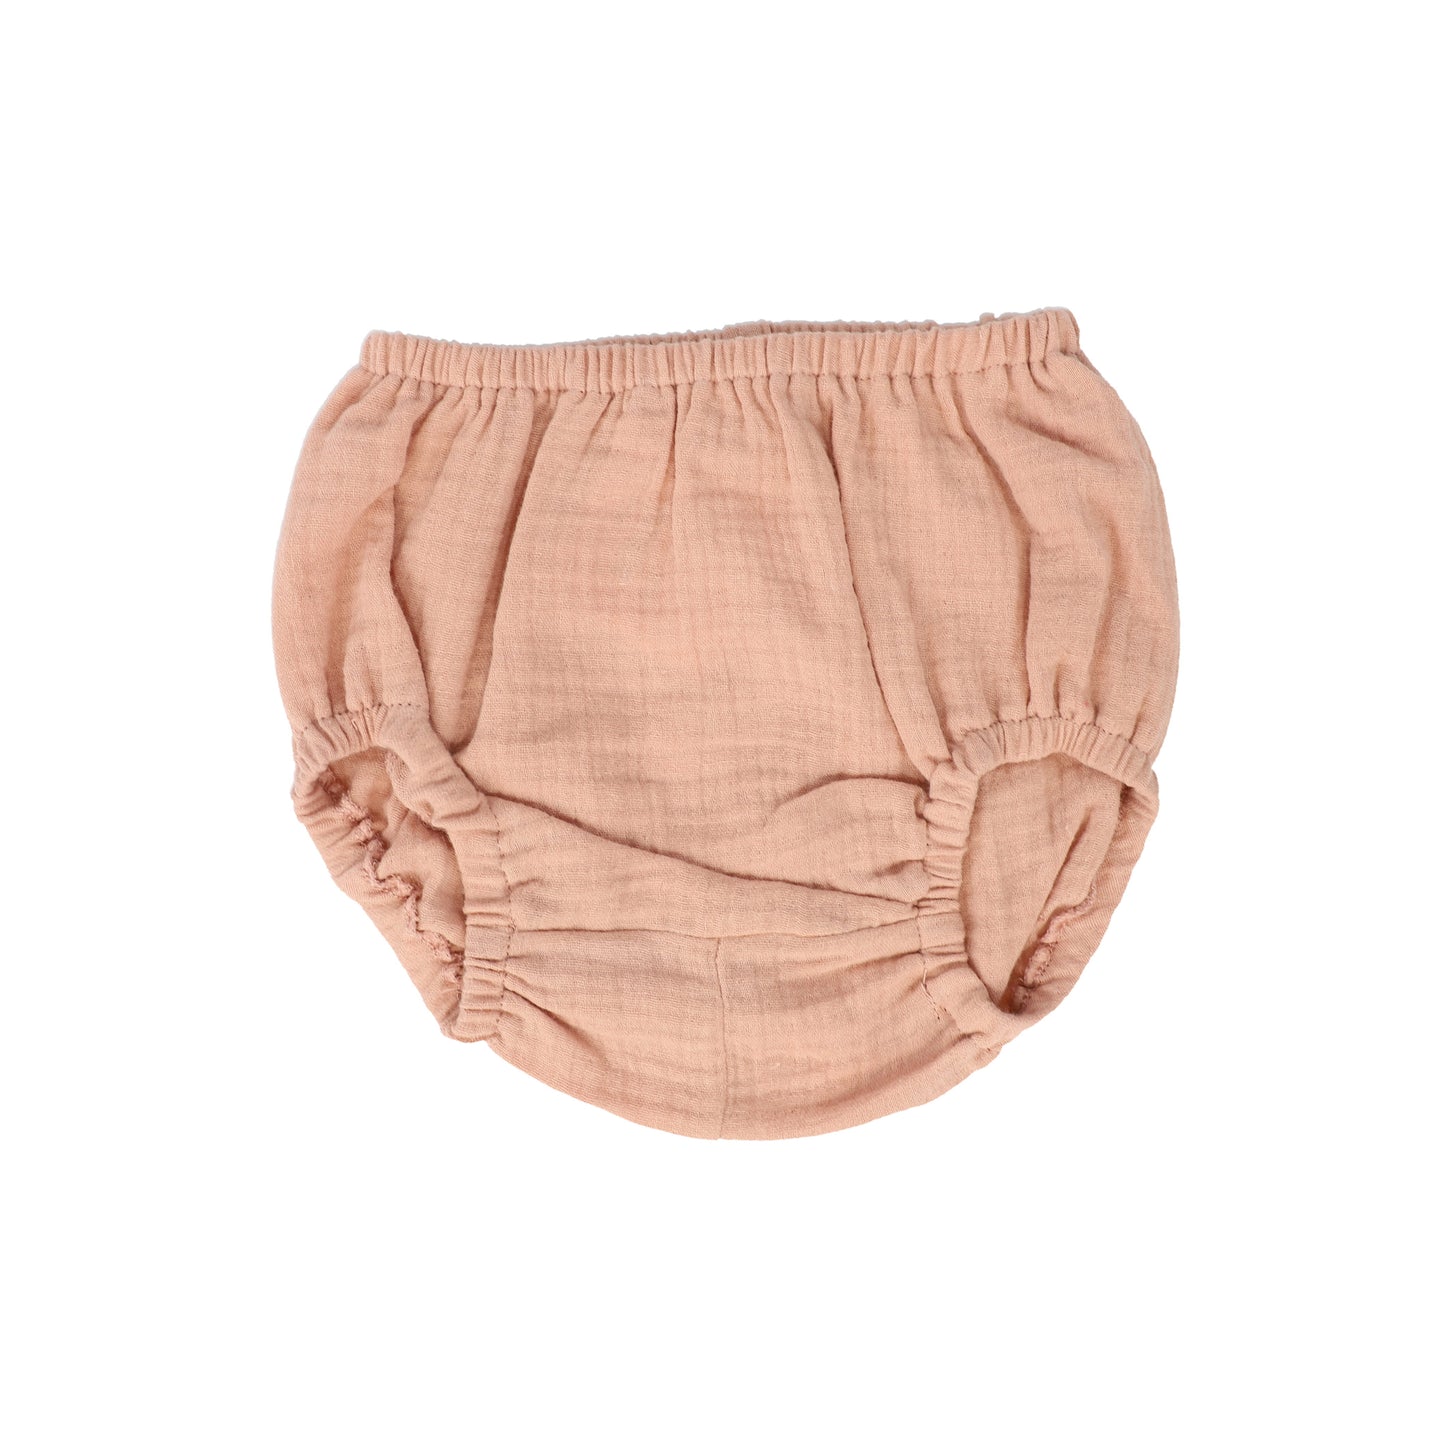 PEQUENO TOCON PINK TEXTURED BLOOMER